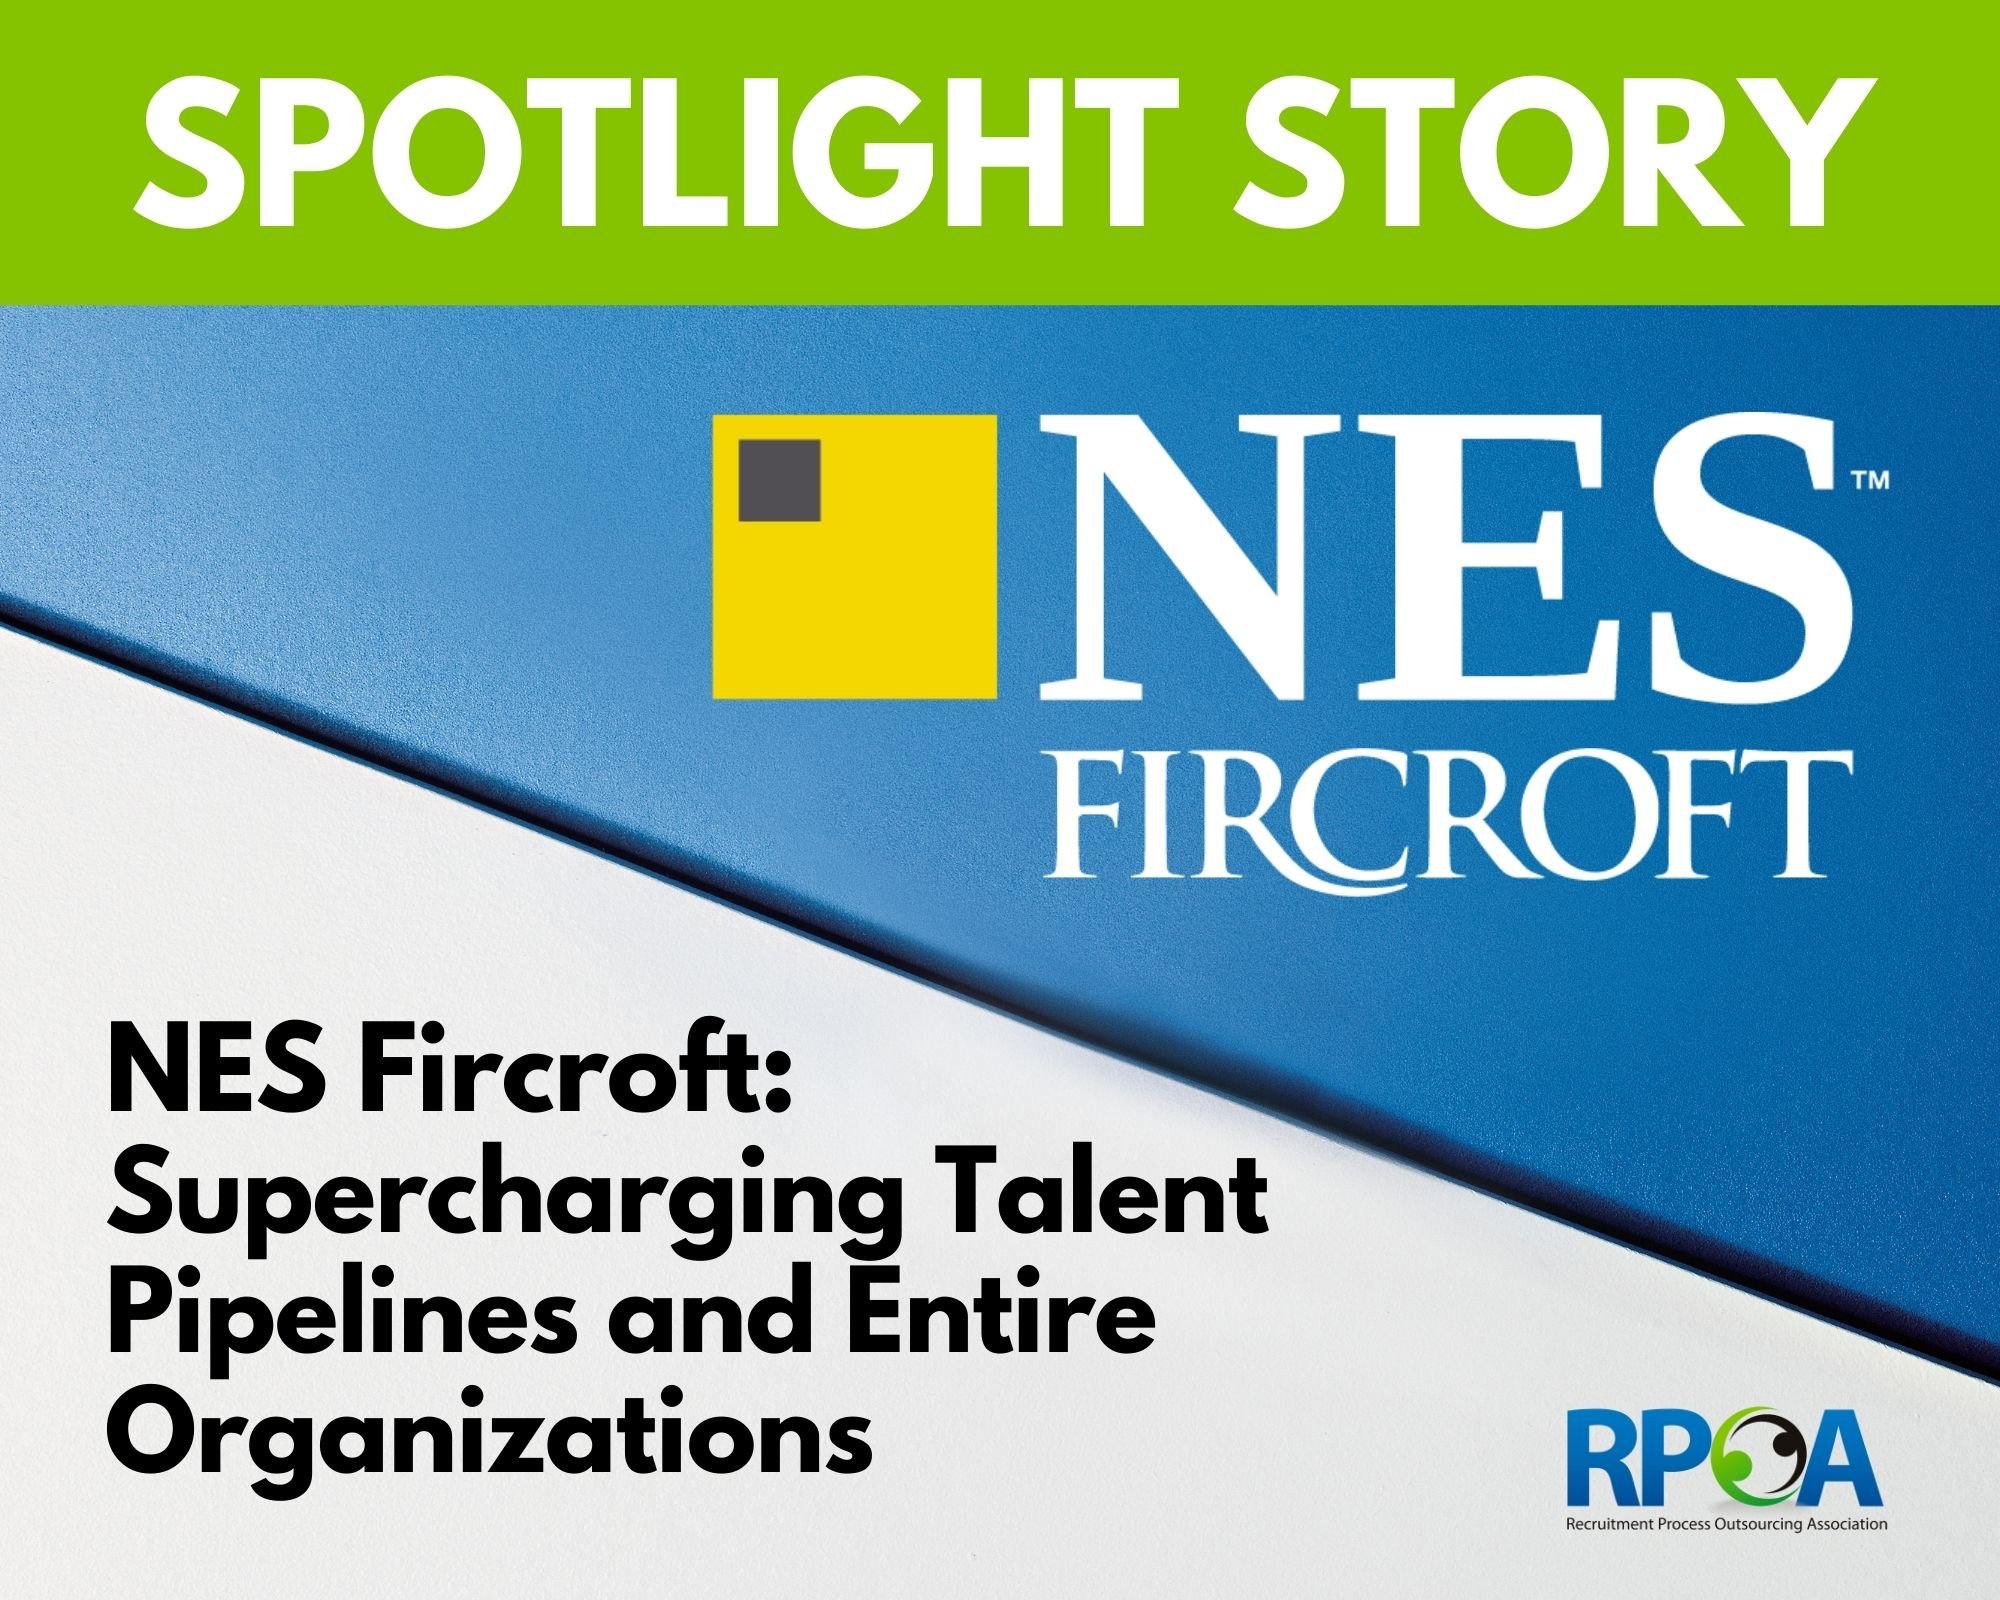 NES Fircroft: A People-Focused & Client-Centric Way to Fill Talent Needs